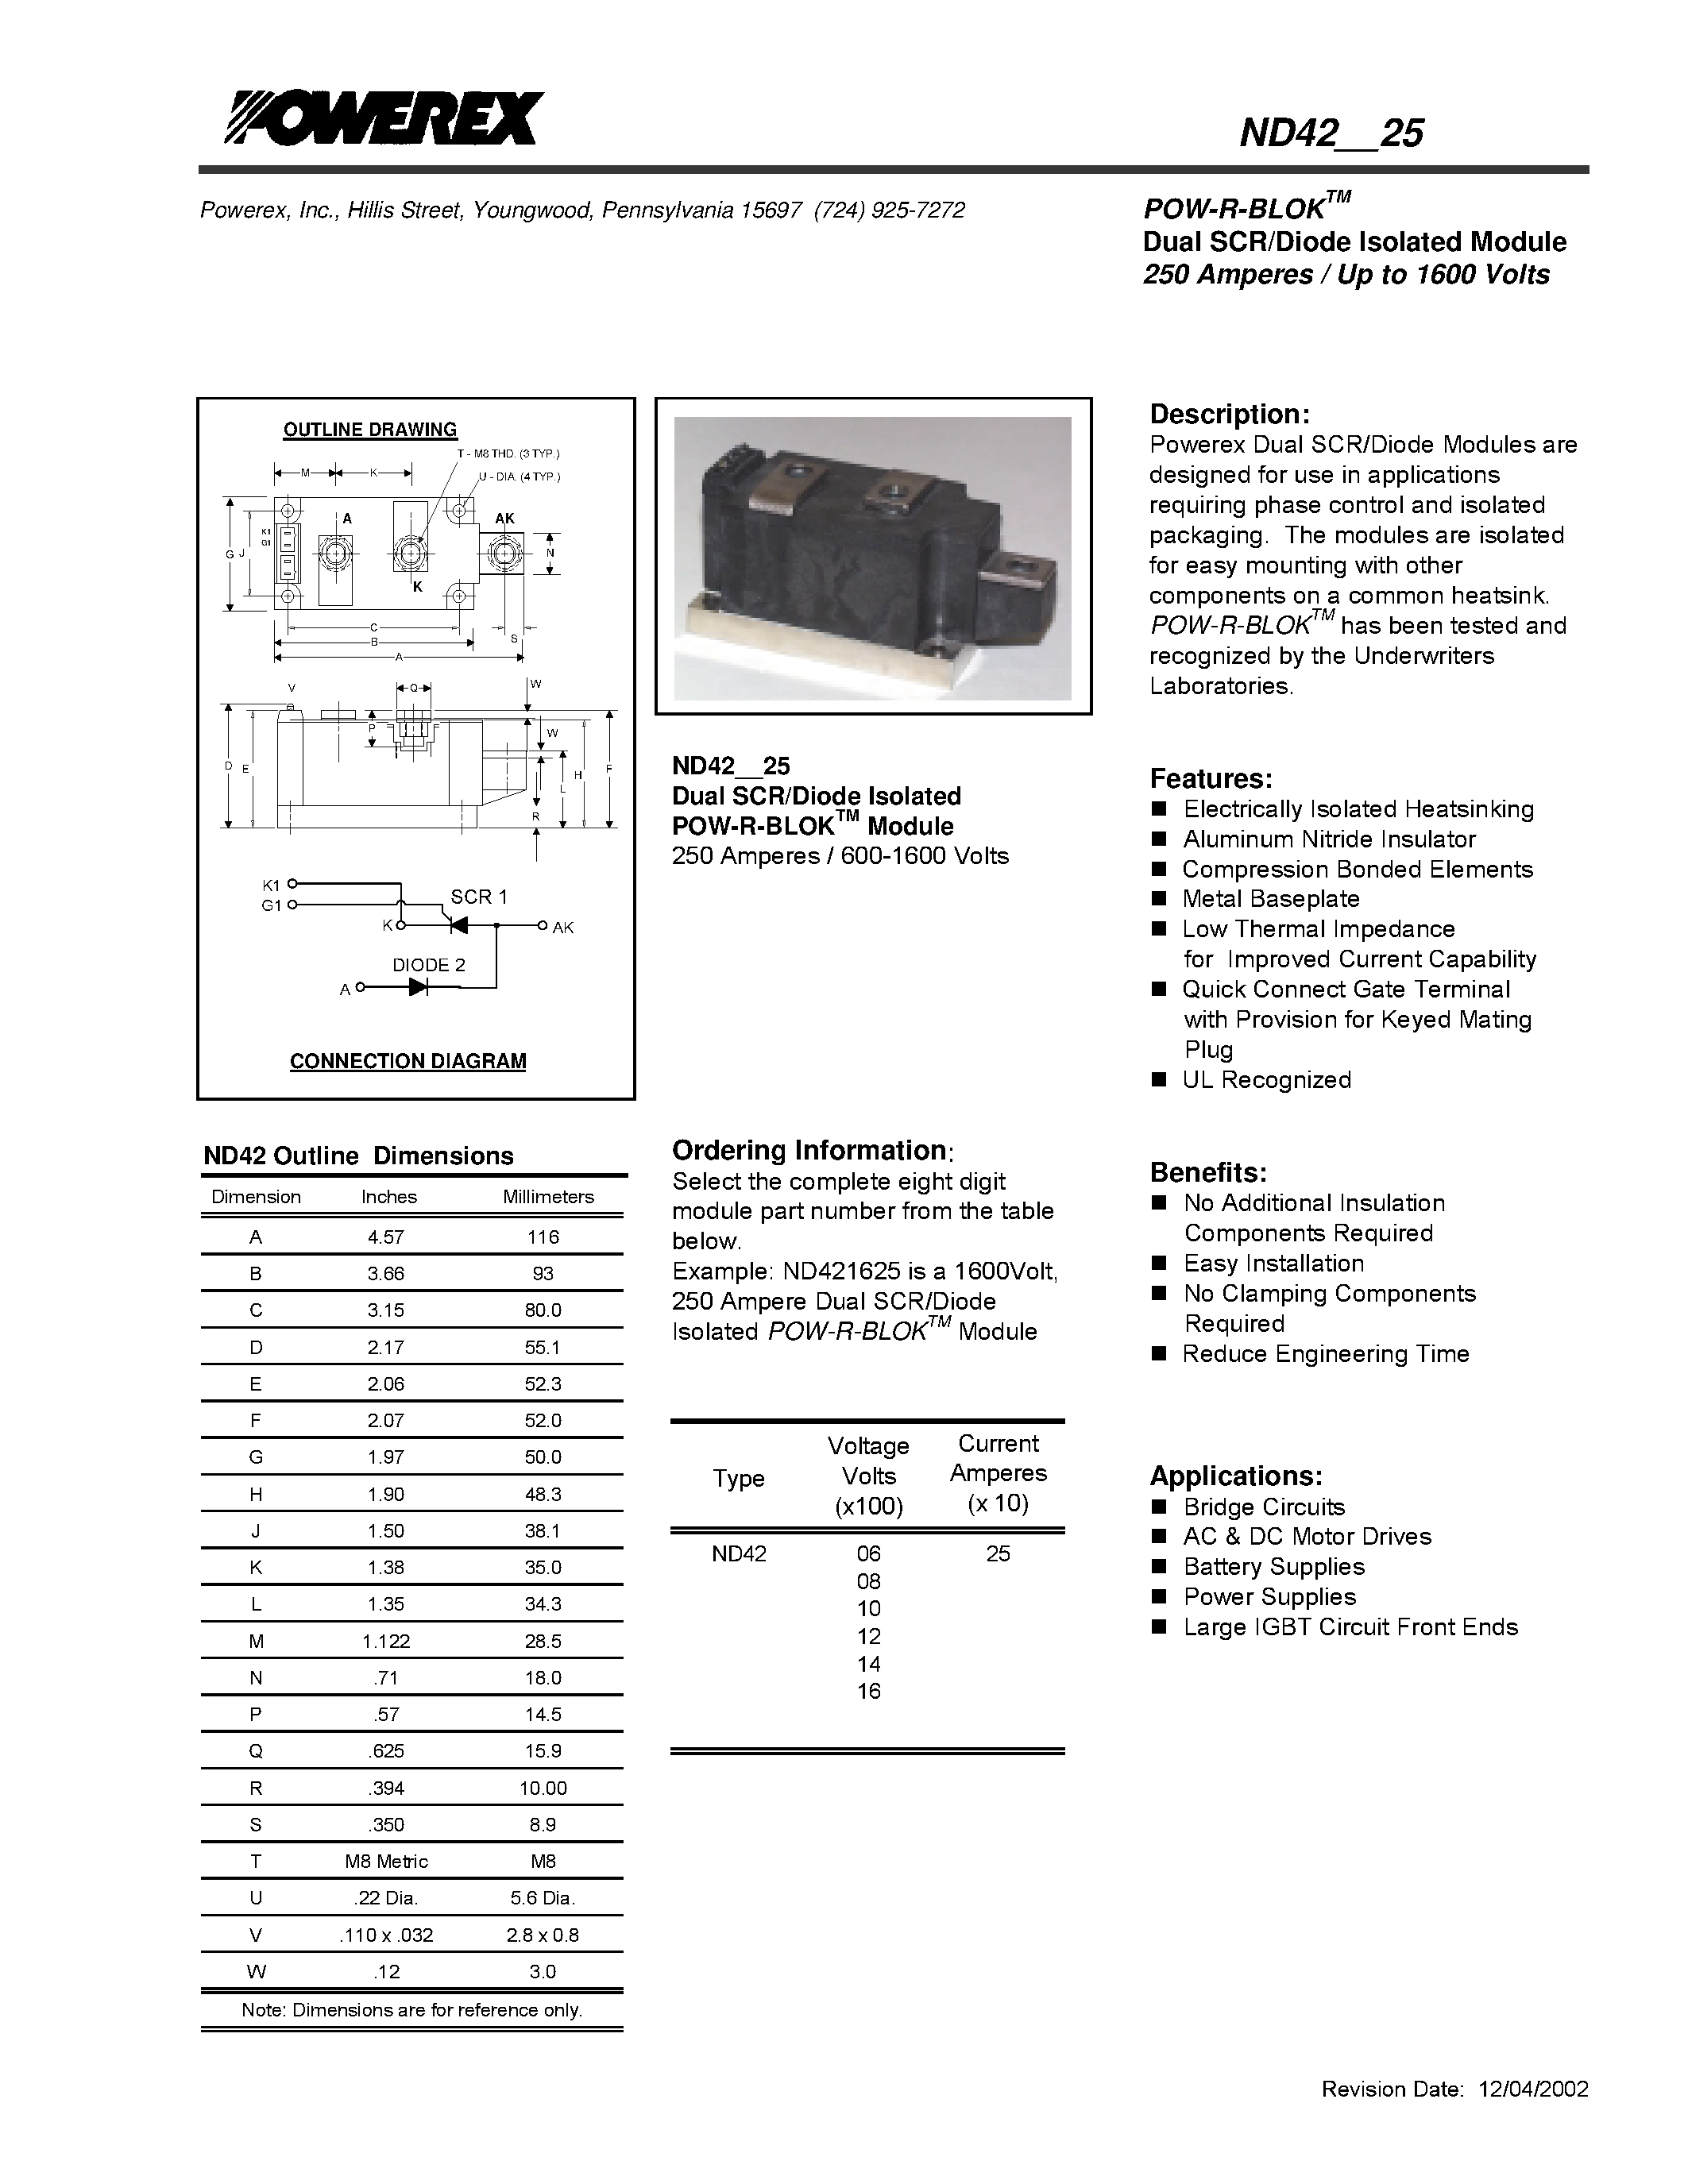 Datasheet ND420625 - POW-R-BLOK Dual SCR/Diode Isolated Module (250 Amperes / Up to 1600 Volts) page 1